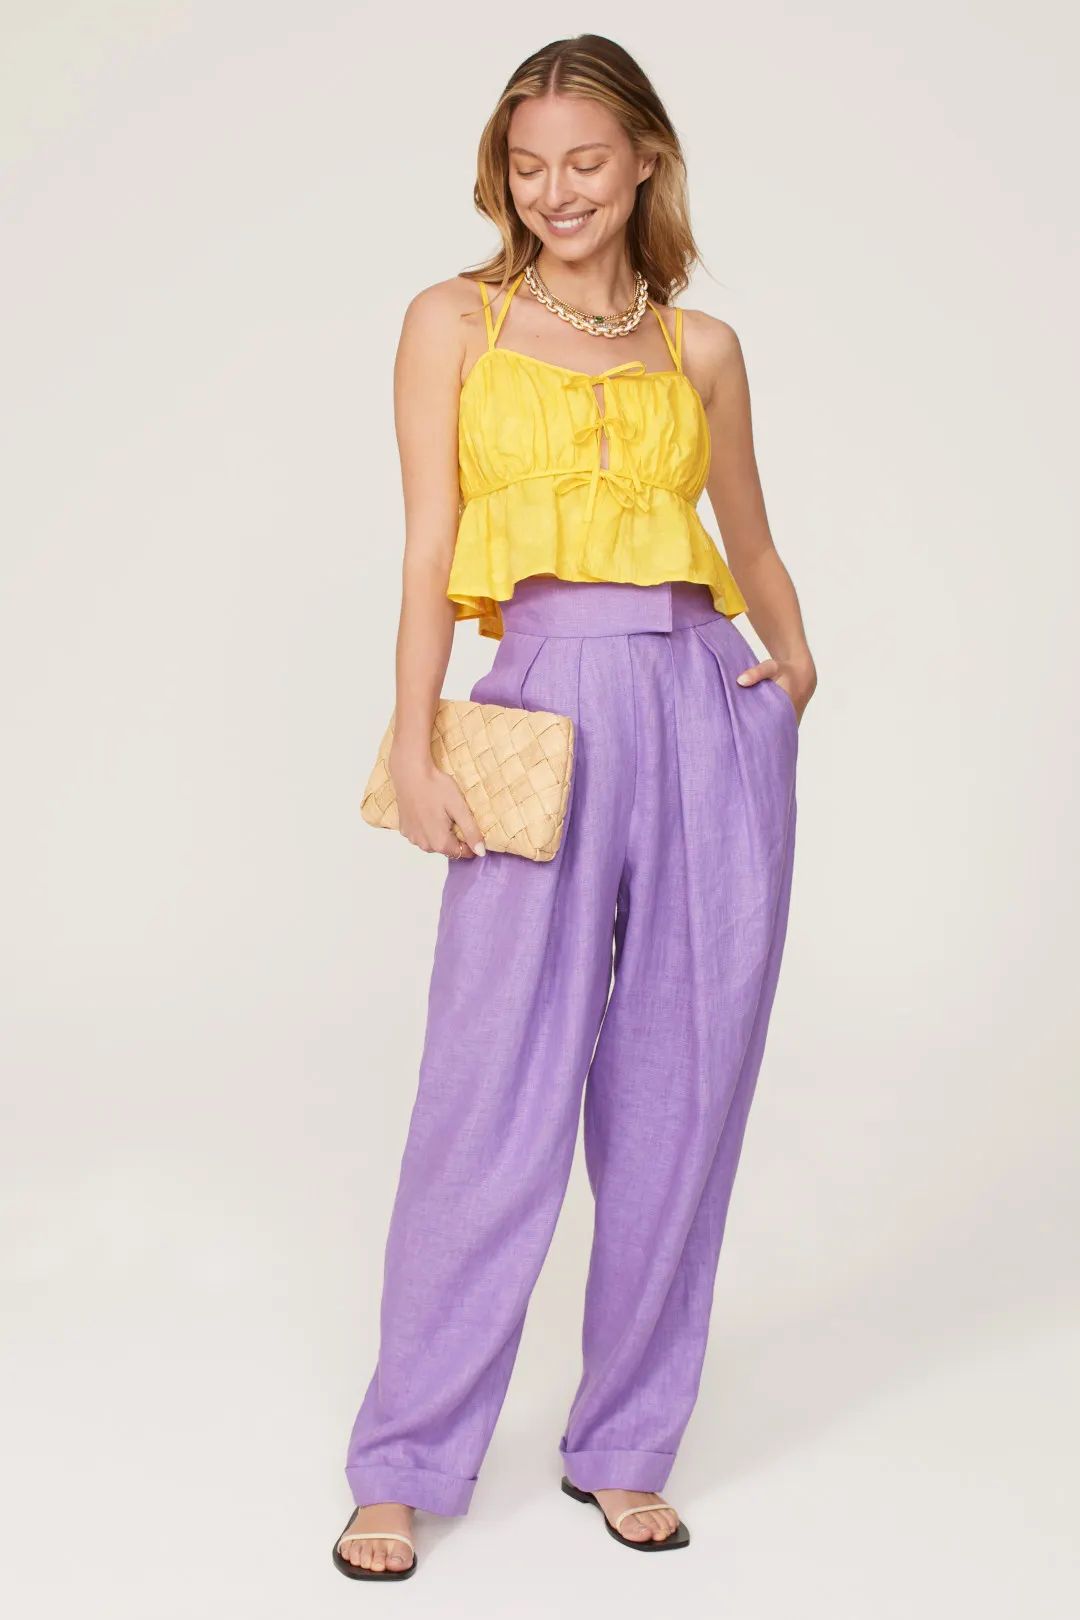 Strappy Yellow Crop Top | Rent the Runway